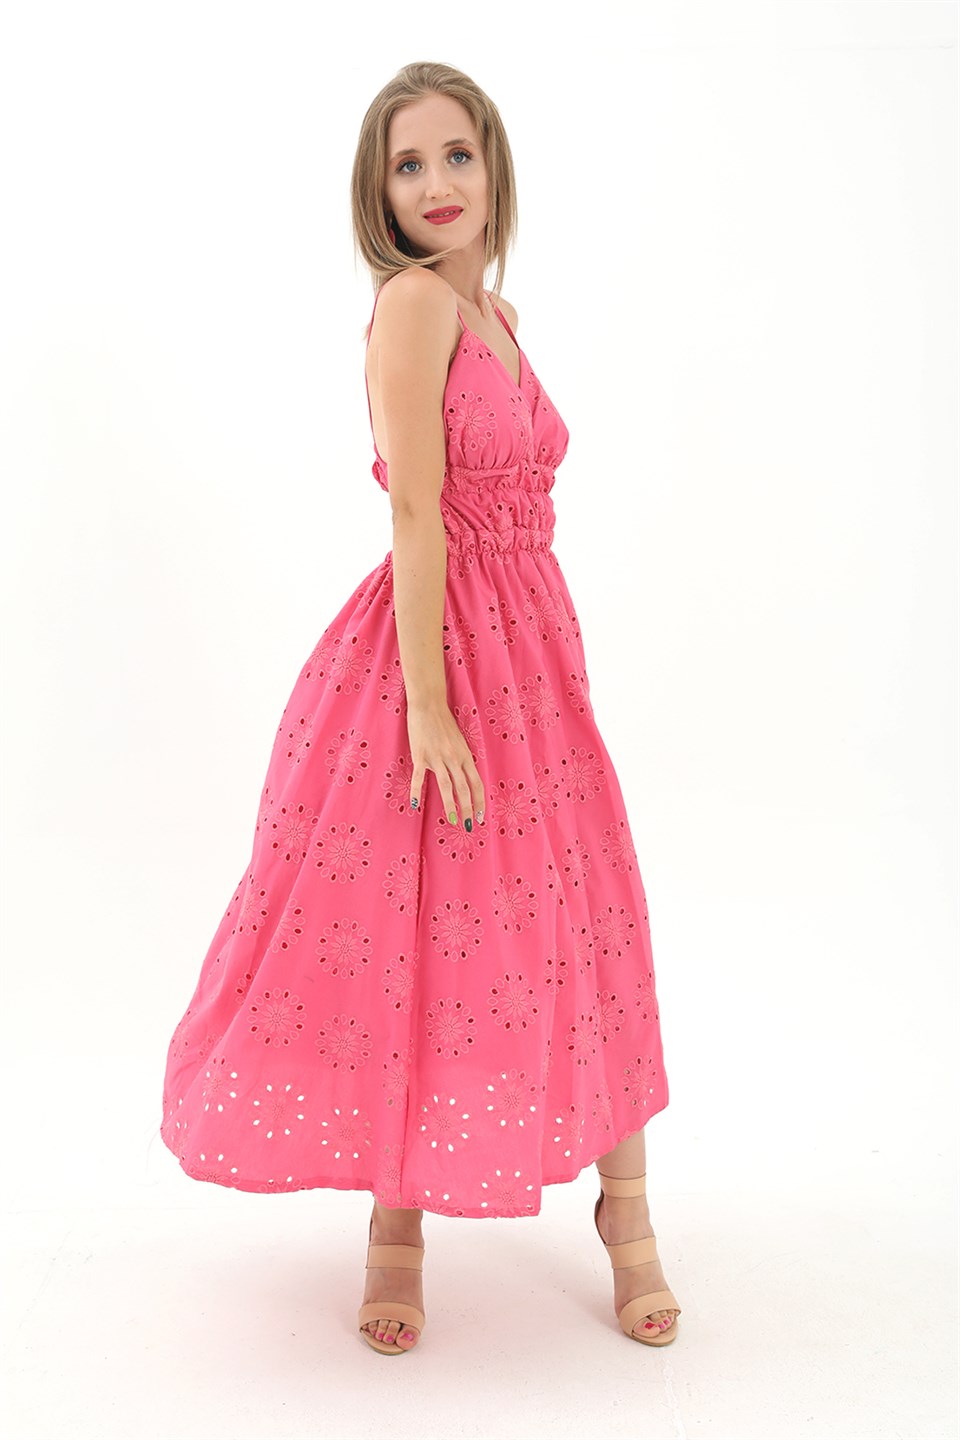 Women's Elastic Waist Lined Back Low-cut Embroidered Dress - Fuchsia - STREETMODE™